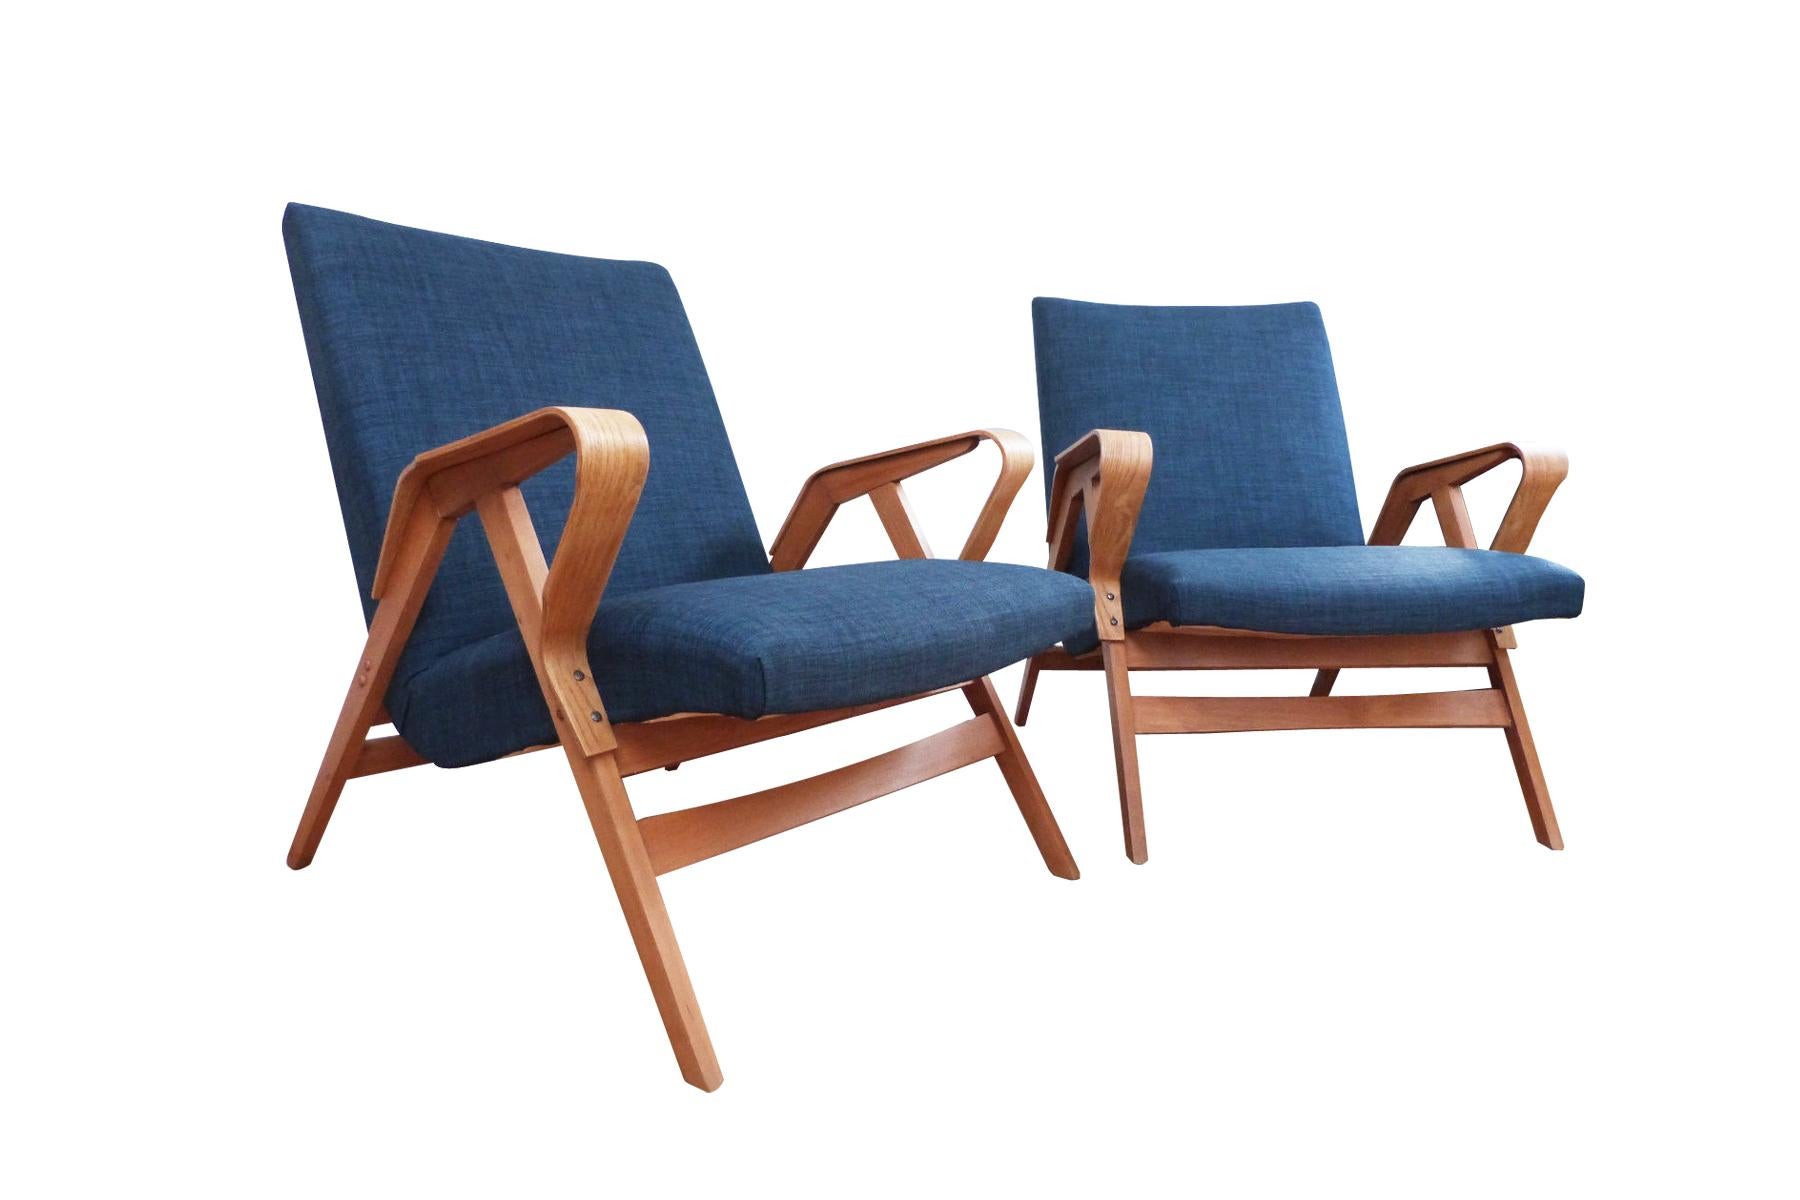 A pair of 1950s bentwood armchairs – Model: Armchair 24-23, manufactured by Tatra Nábytok Pravenec, n. p.

These 2 beautiful bentwood beech armchairs were designed by Tatra Nábytok in the 1950s and are often cited as being designed by Frantisek